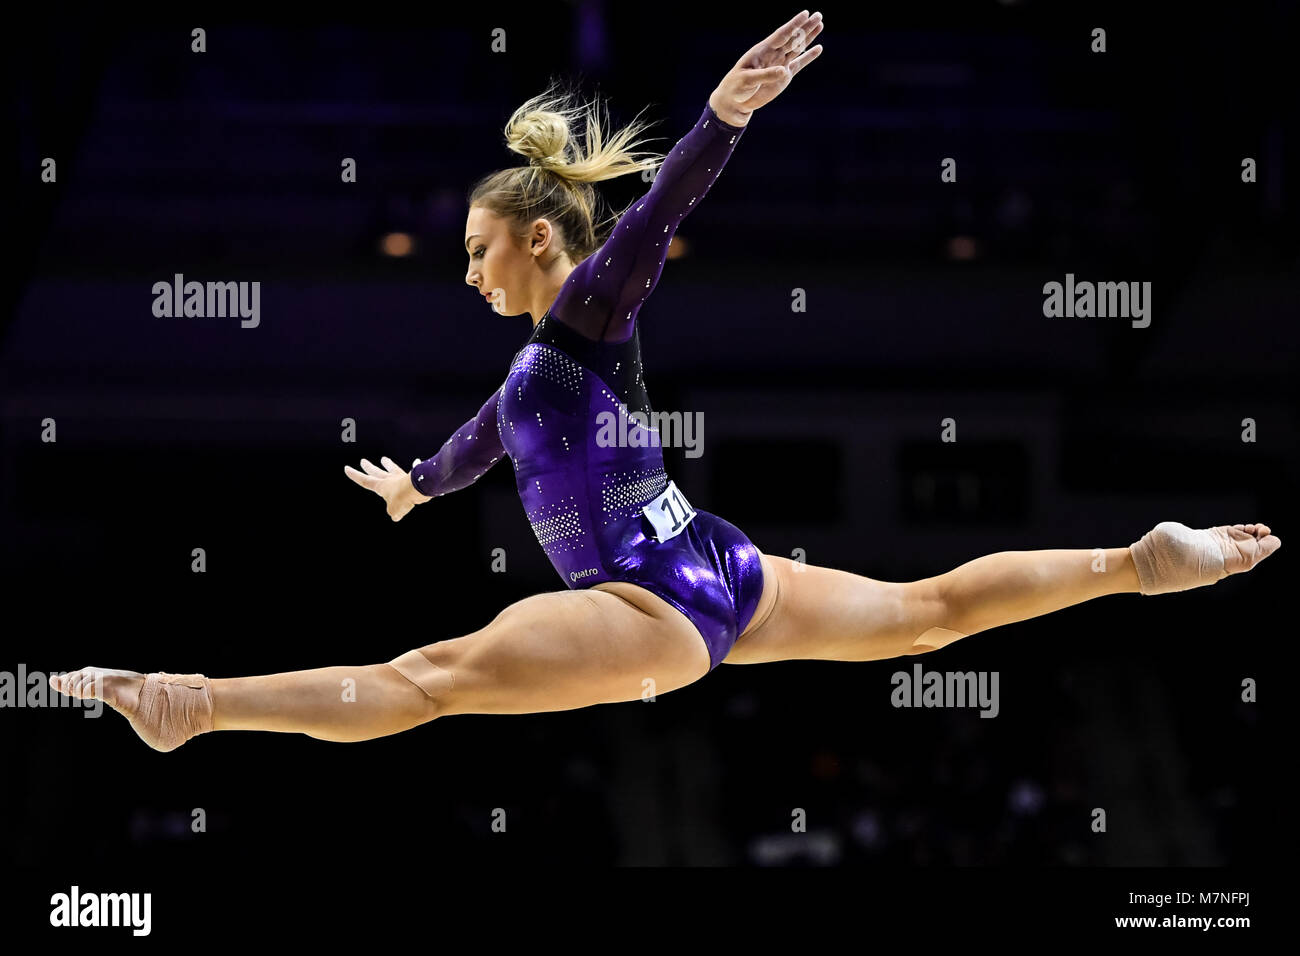 Echo Arena, Liverpool, UK. 11th Mar, 2018. Shannon Archer competes on the Balance Beam during the WAG Senior Apparatus Final/MAG Masters of the 2018 Gymnastics British Championships at Echo Arena on Sunday, 11 March 2018. LIVERPOOL ENGLAND. Credit: Taka G Wu Credit: Taka Wu/Alamy Live News Stock Photo